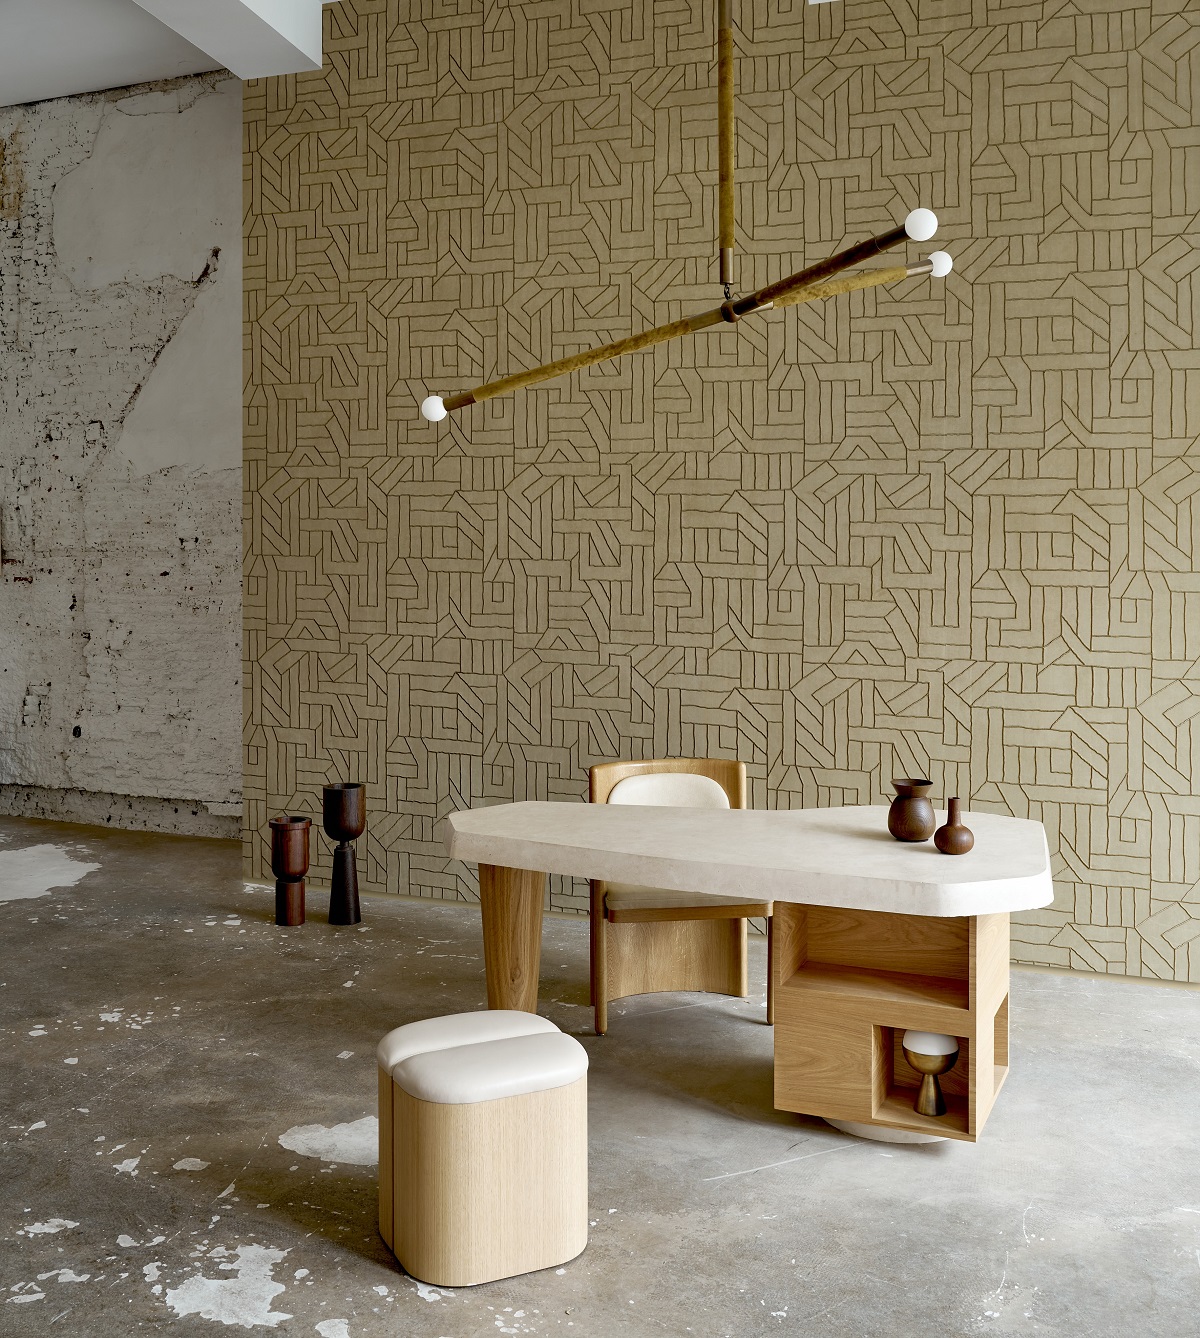 table and chair under architectural light in front of embroidered arte wallcovering